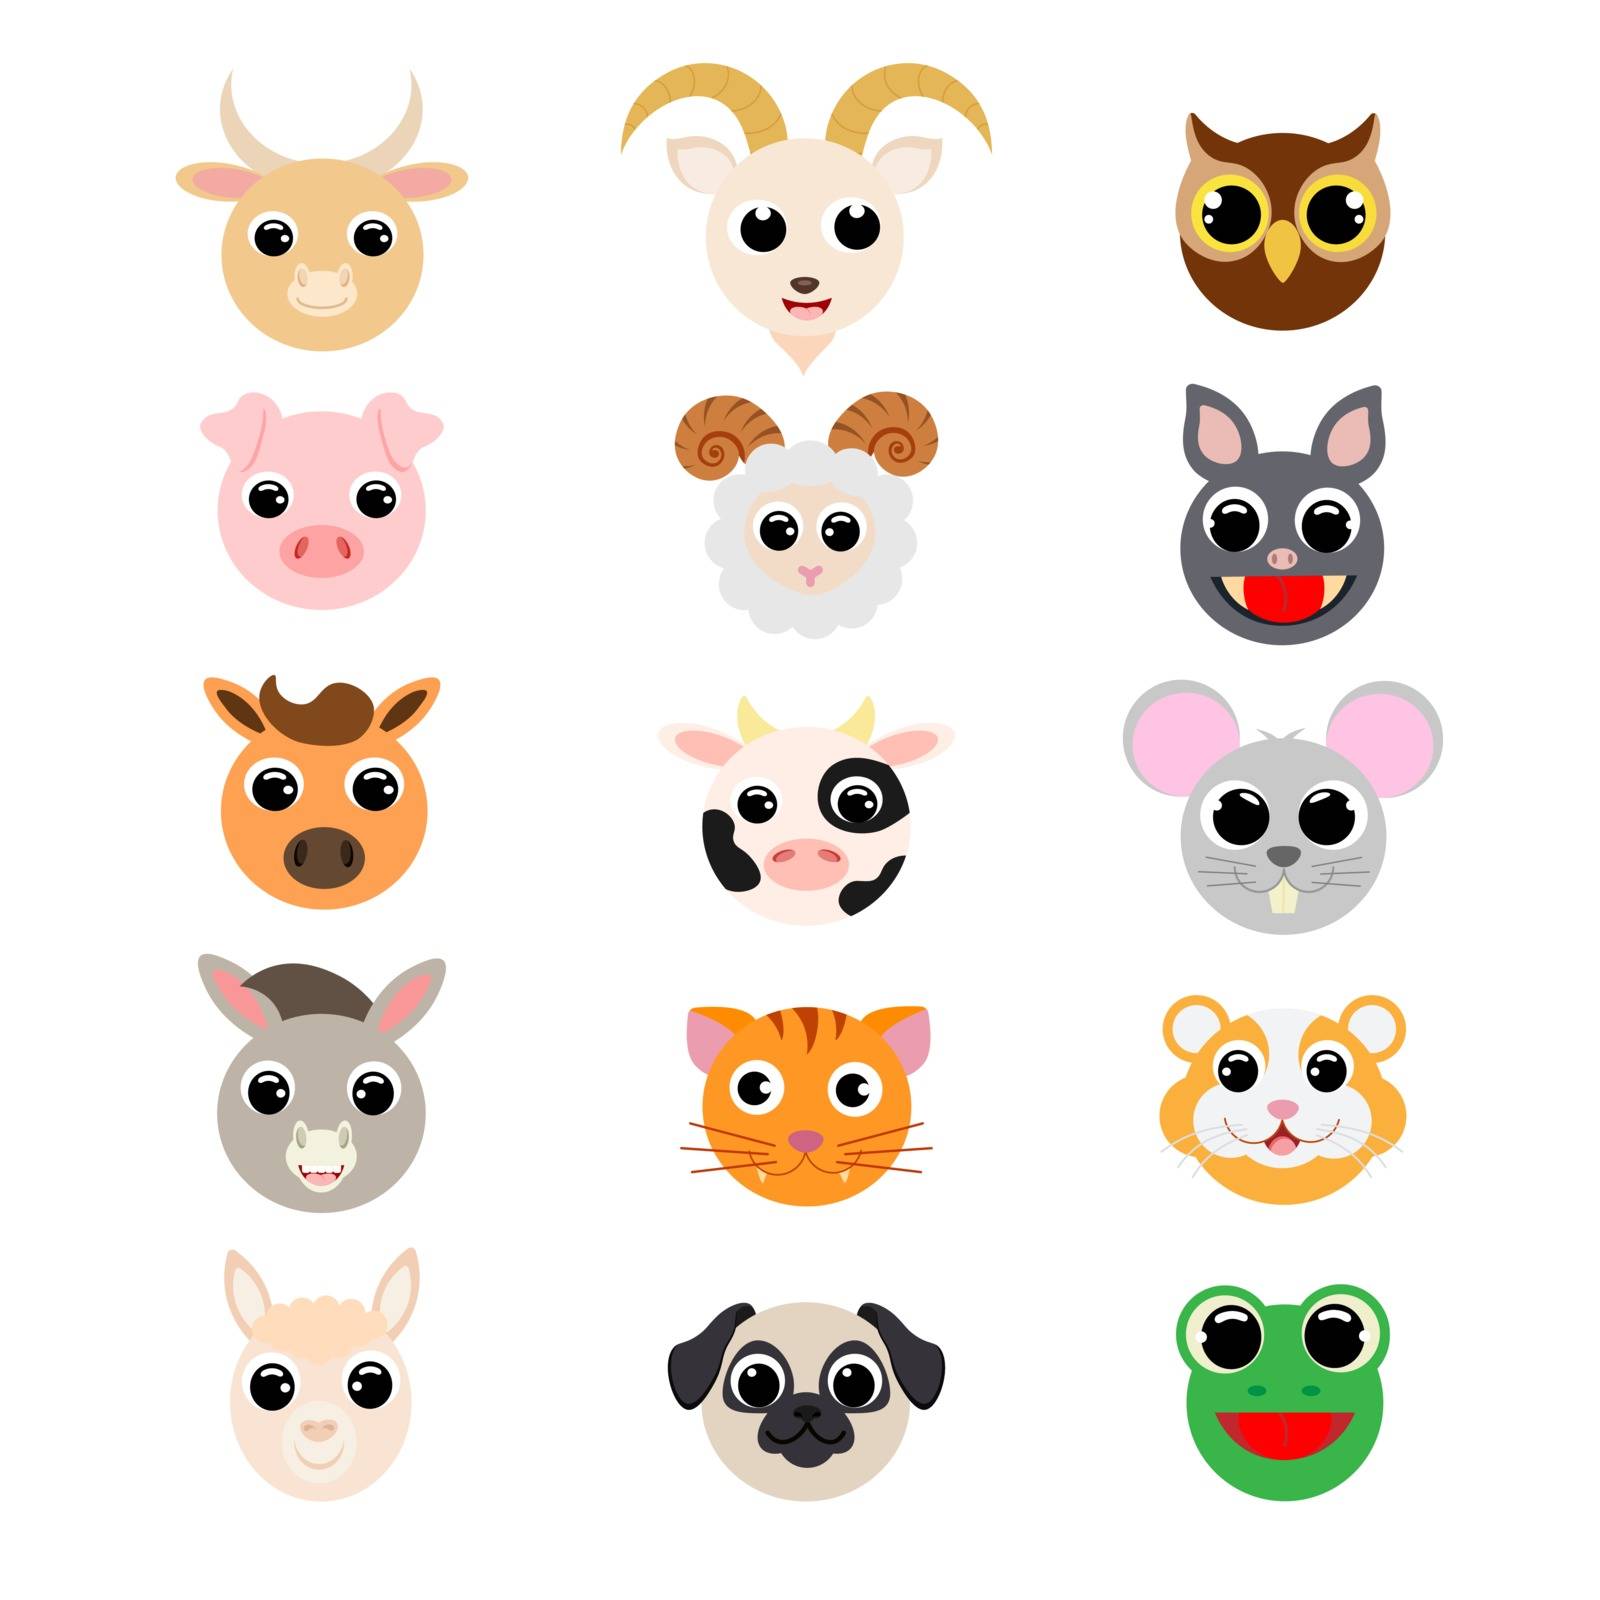 Funny cute domestic animals heads. Cartoon characters. Flat vector stock illustration on white background. Cute heads of pig, yak, sheep, cow, goat, alpaca, dog, cat, horse, donkey, mouse, hamster